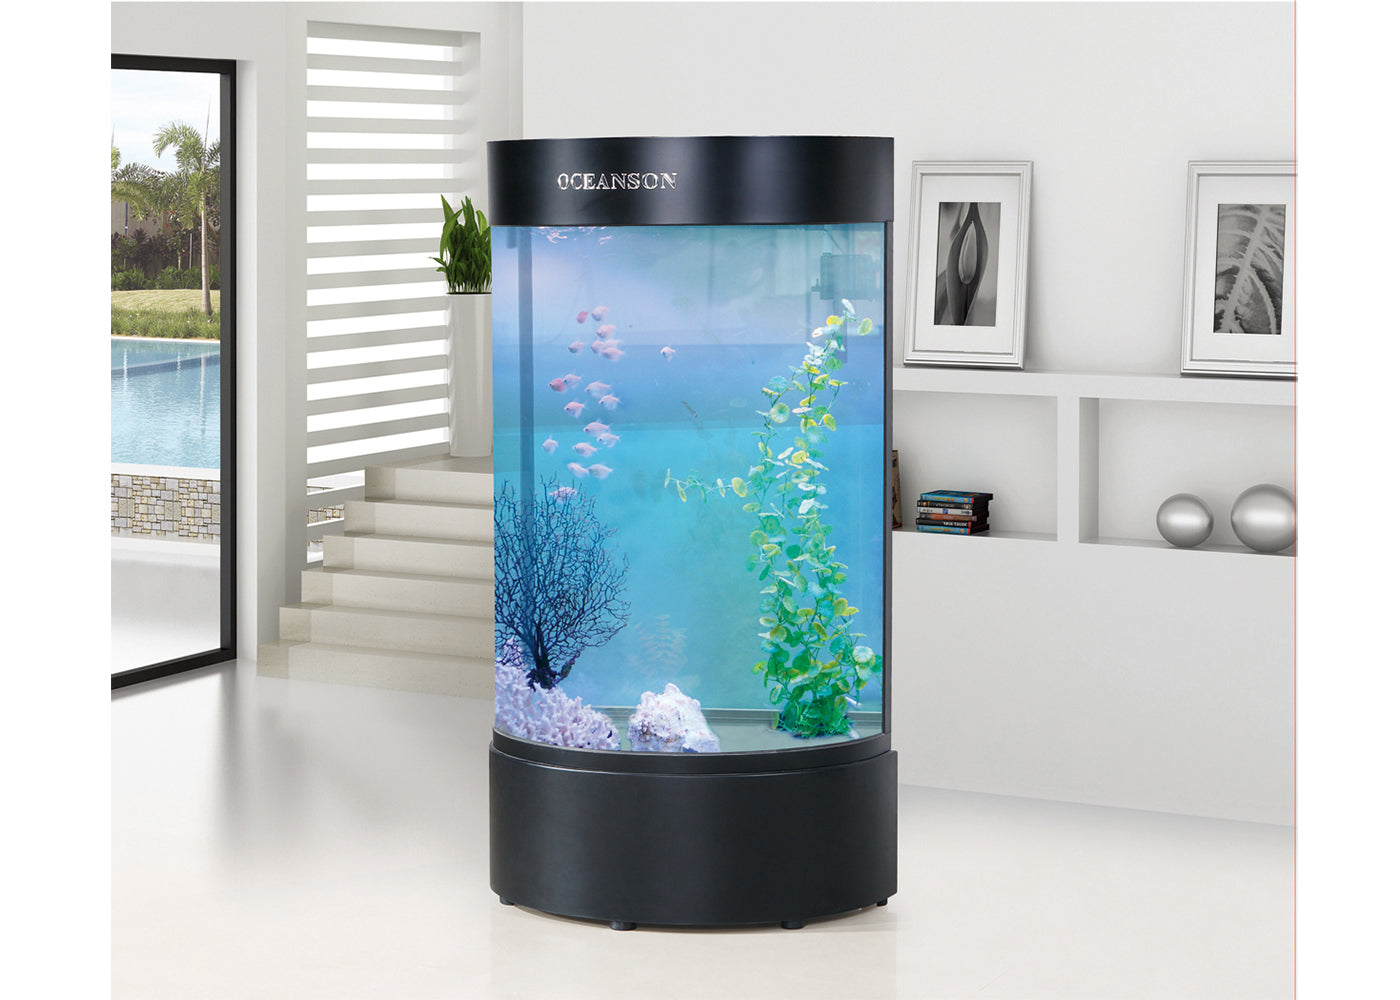 Oceanson DHH680 - 60cm Tall Half Round Aquarium and Base with Back Filter